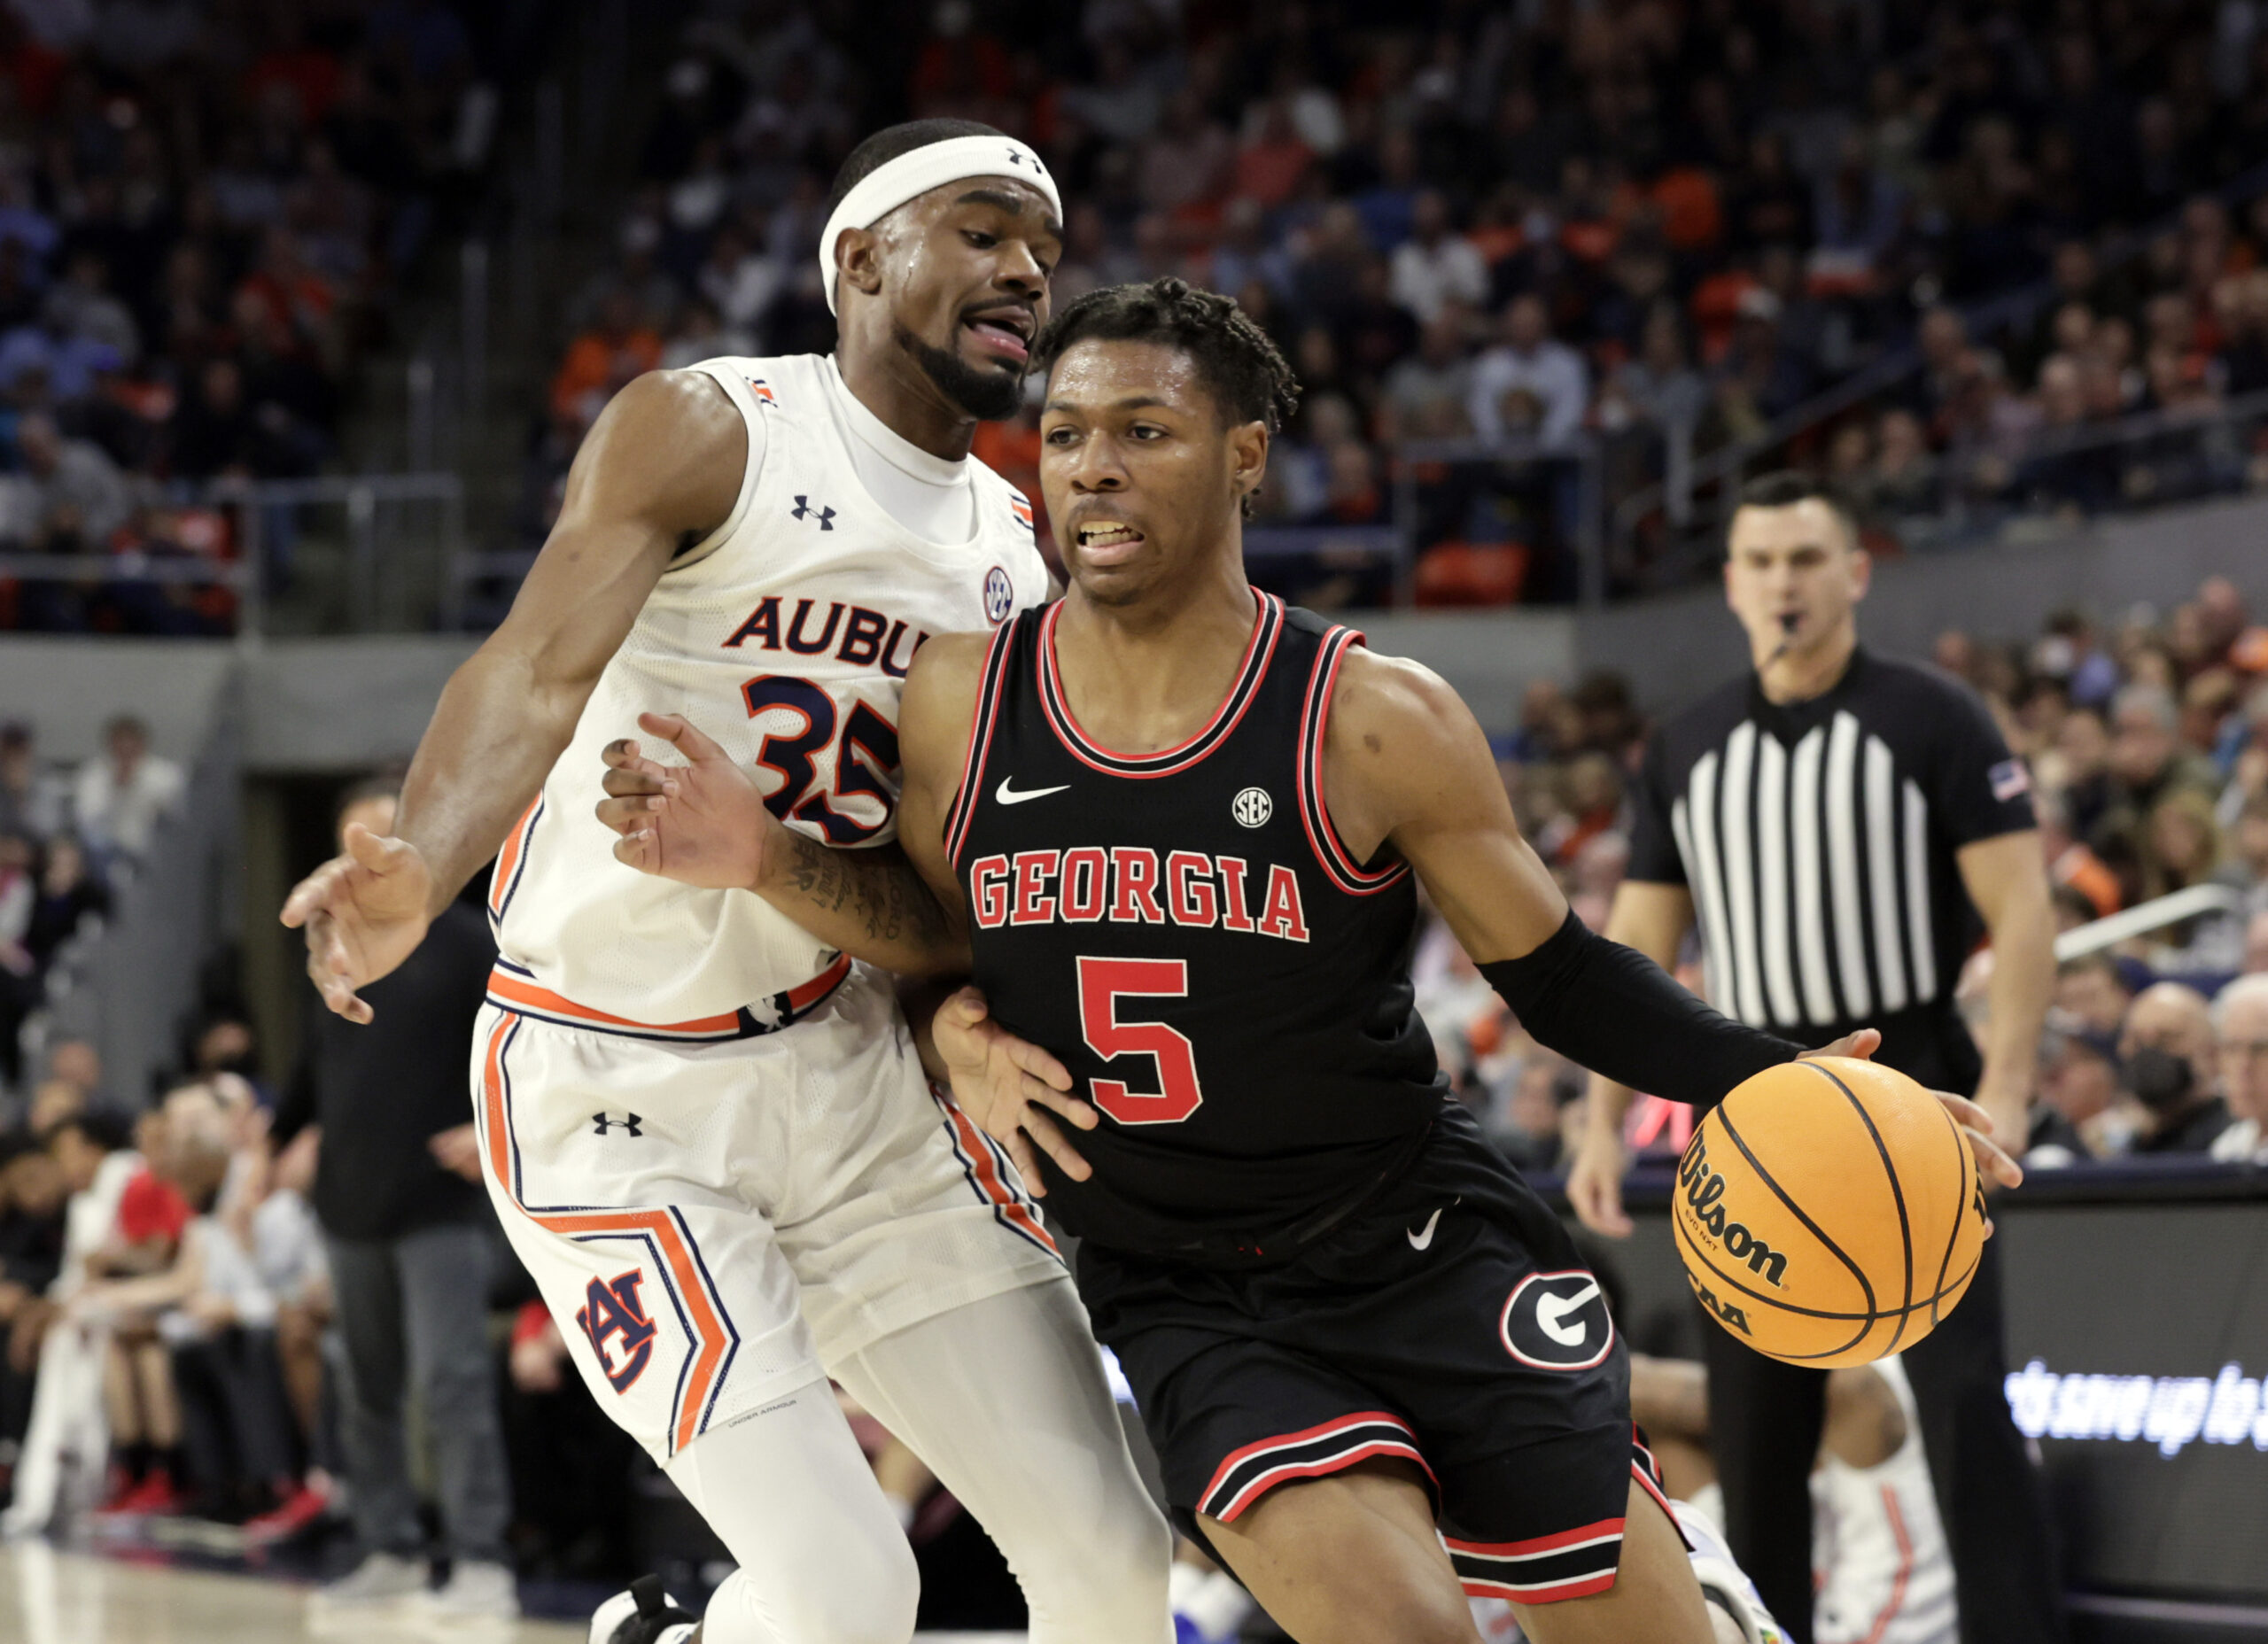 No. 1 Auburn survived against Georgia, and preserved men’s college basketball history